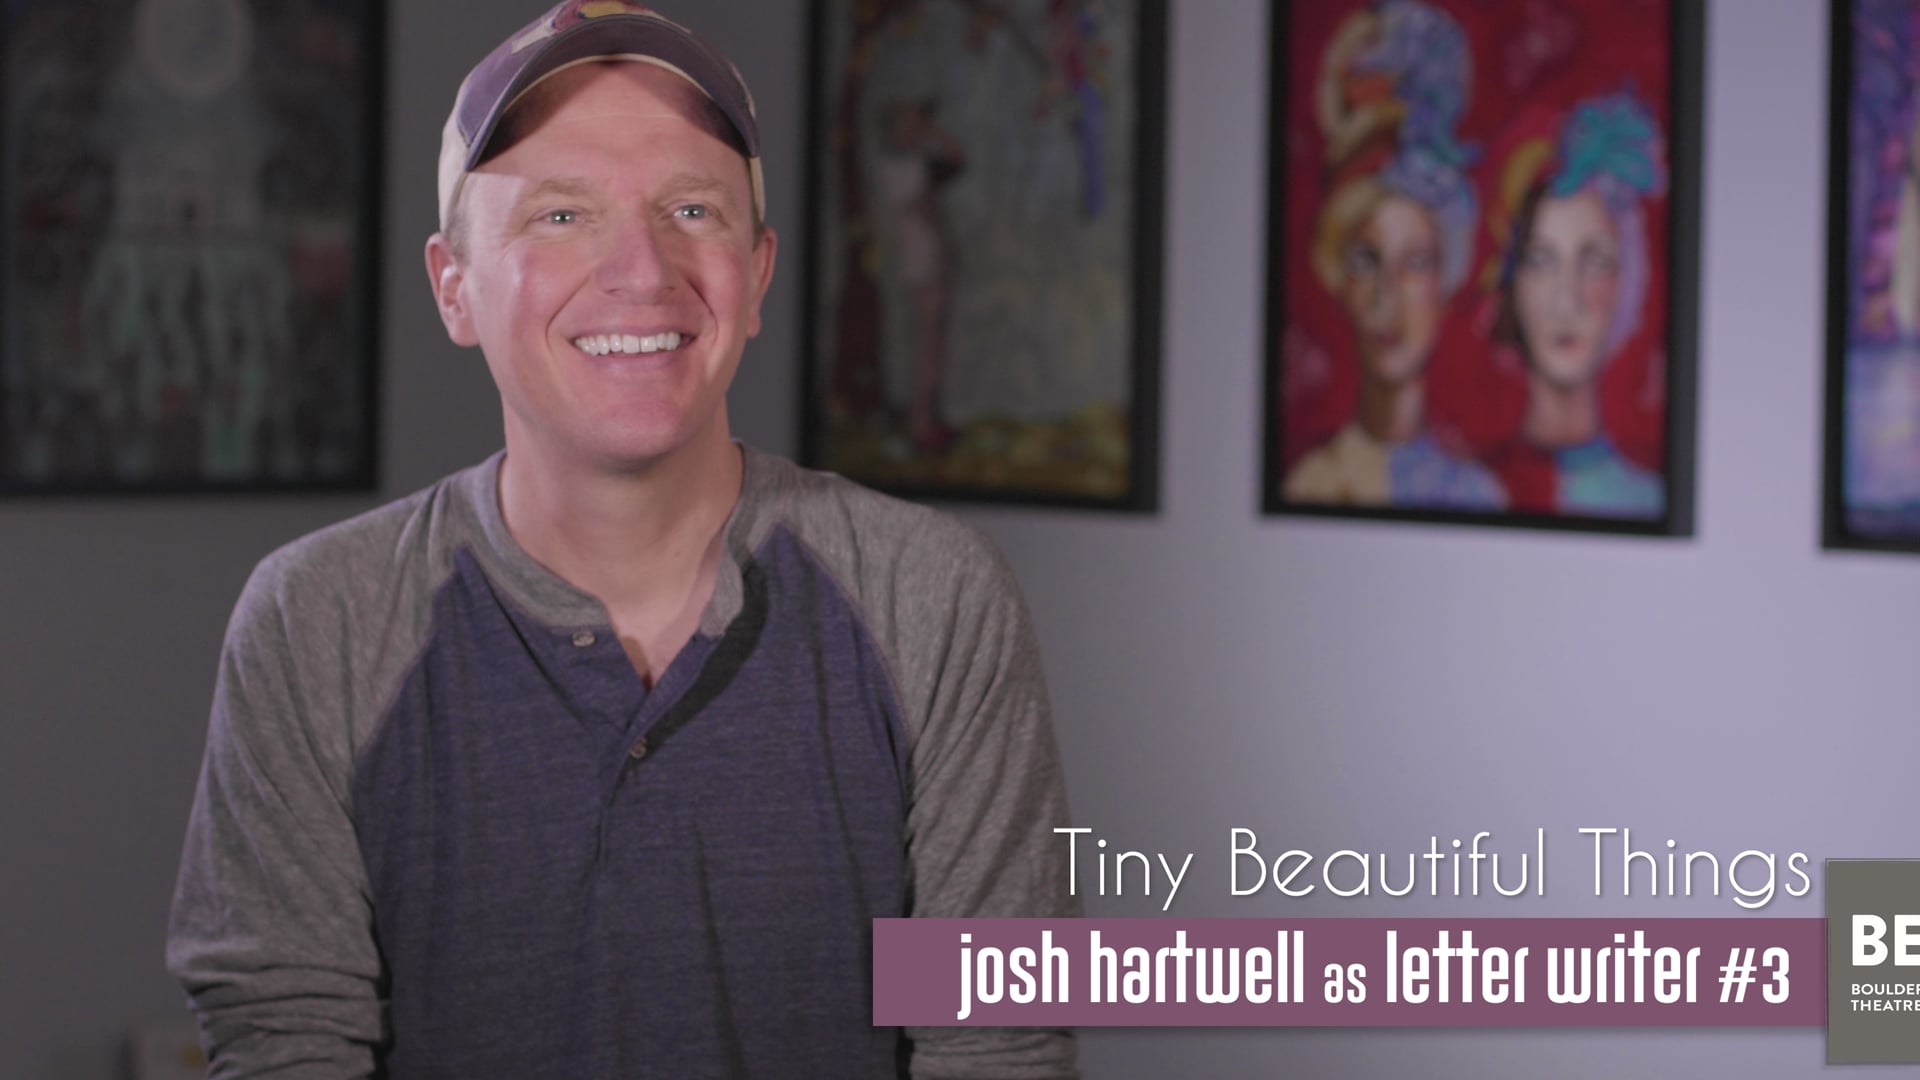 Meet the Cast of "Tiny Beautiful Things" - Josh Hartwell as Letter Writer #3